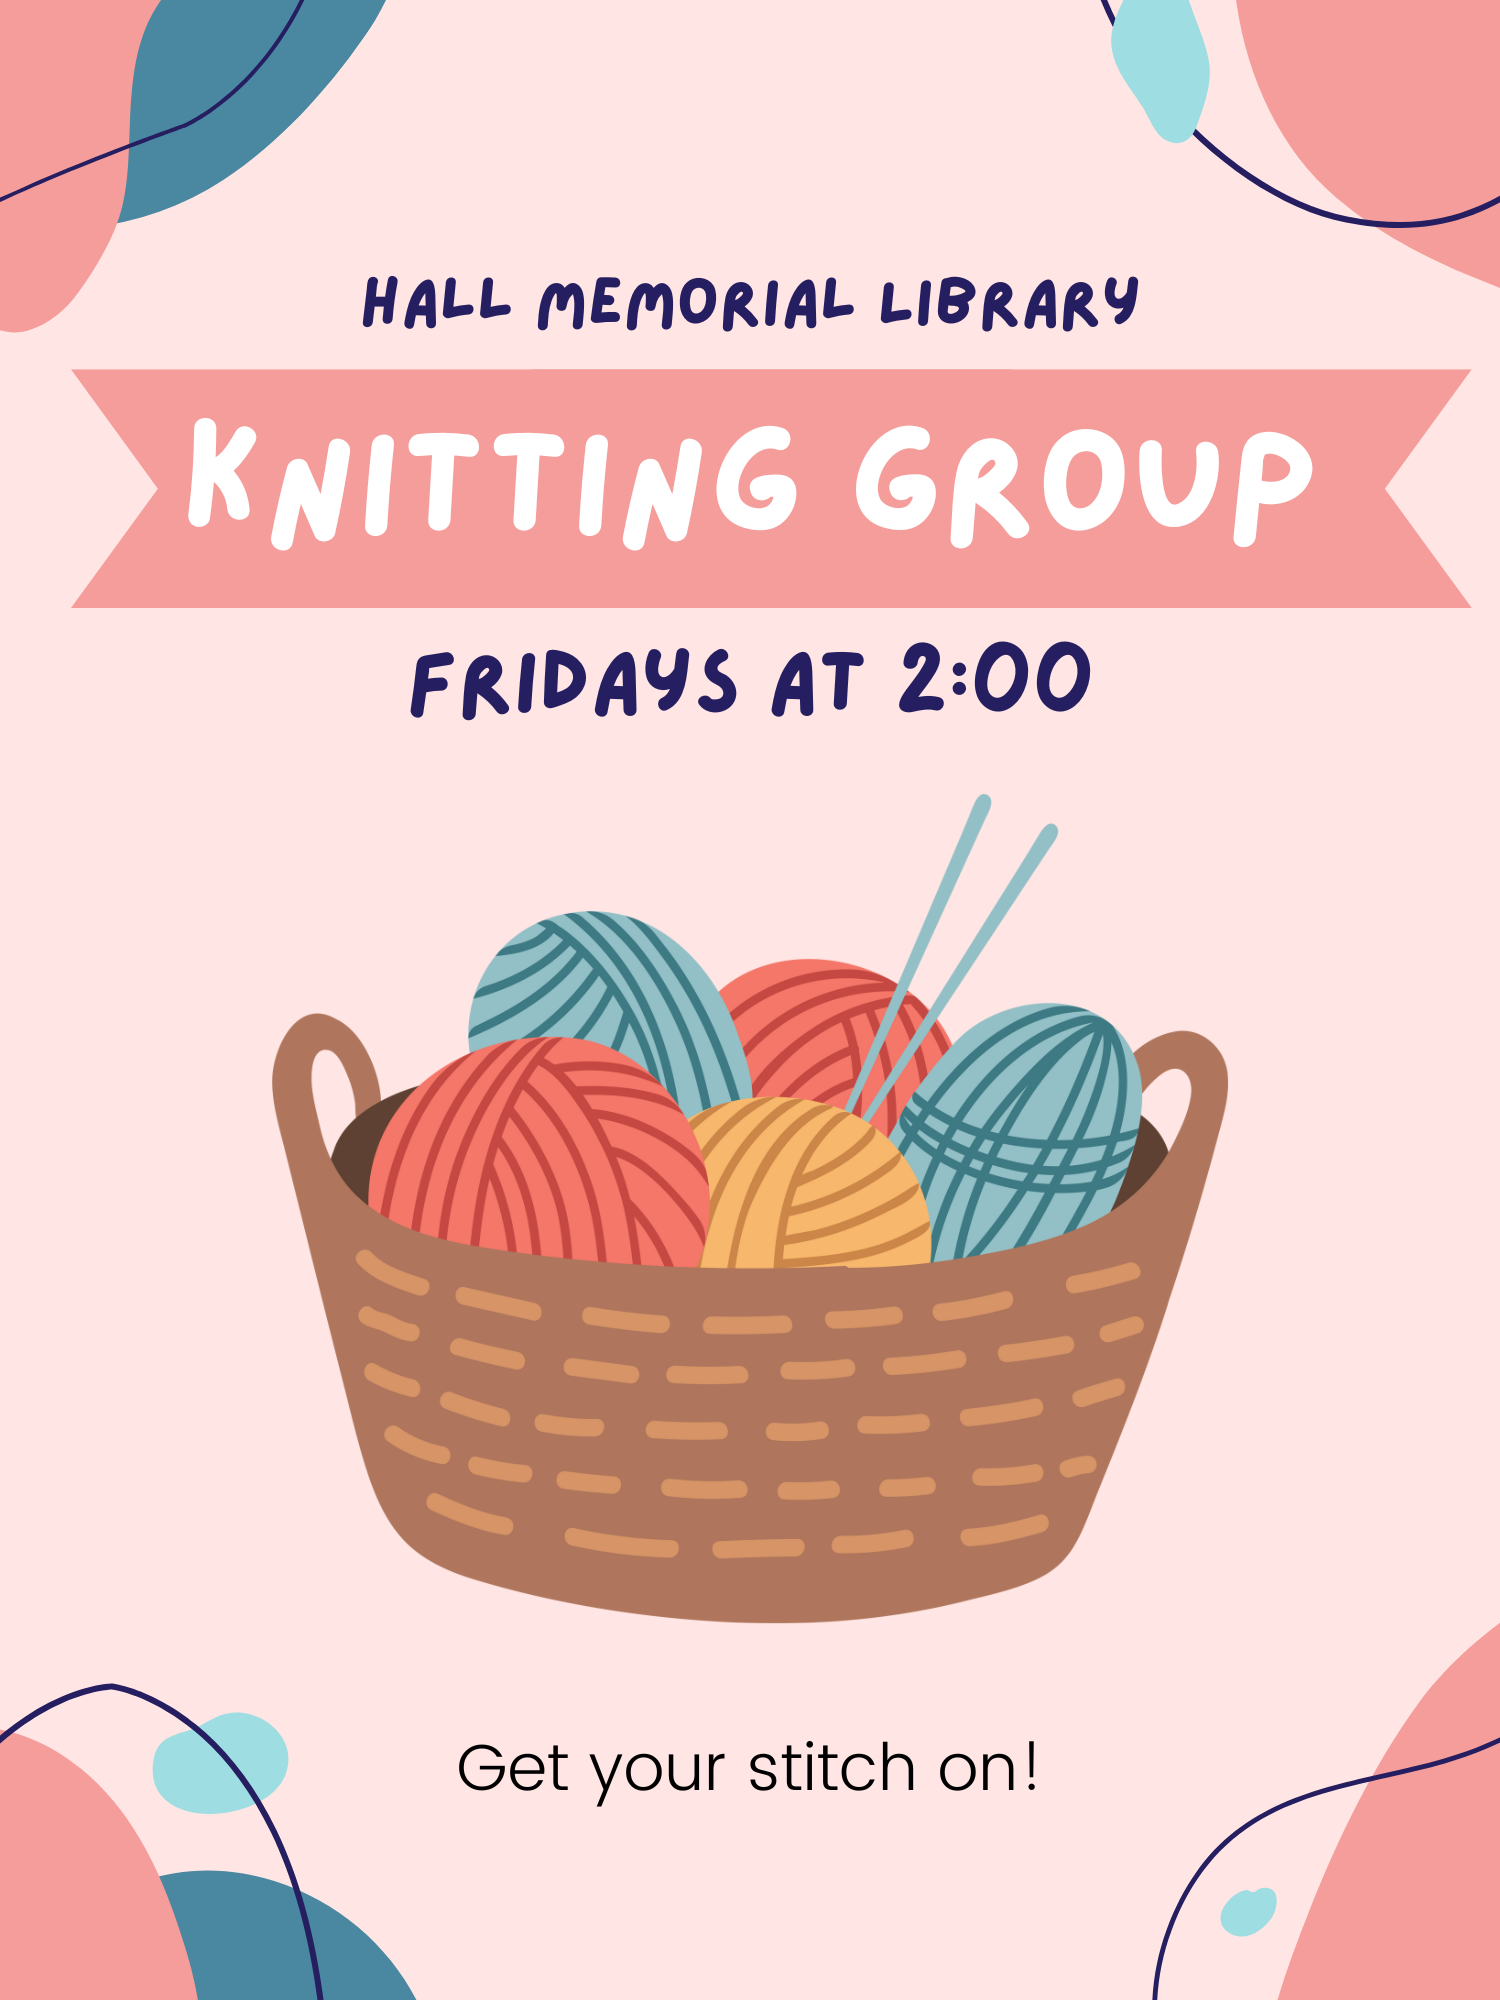 Knitting Group 2:oo fridays flyer